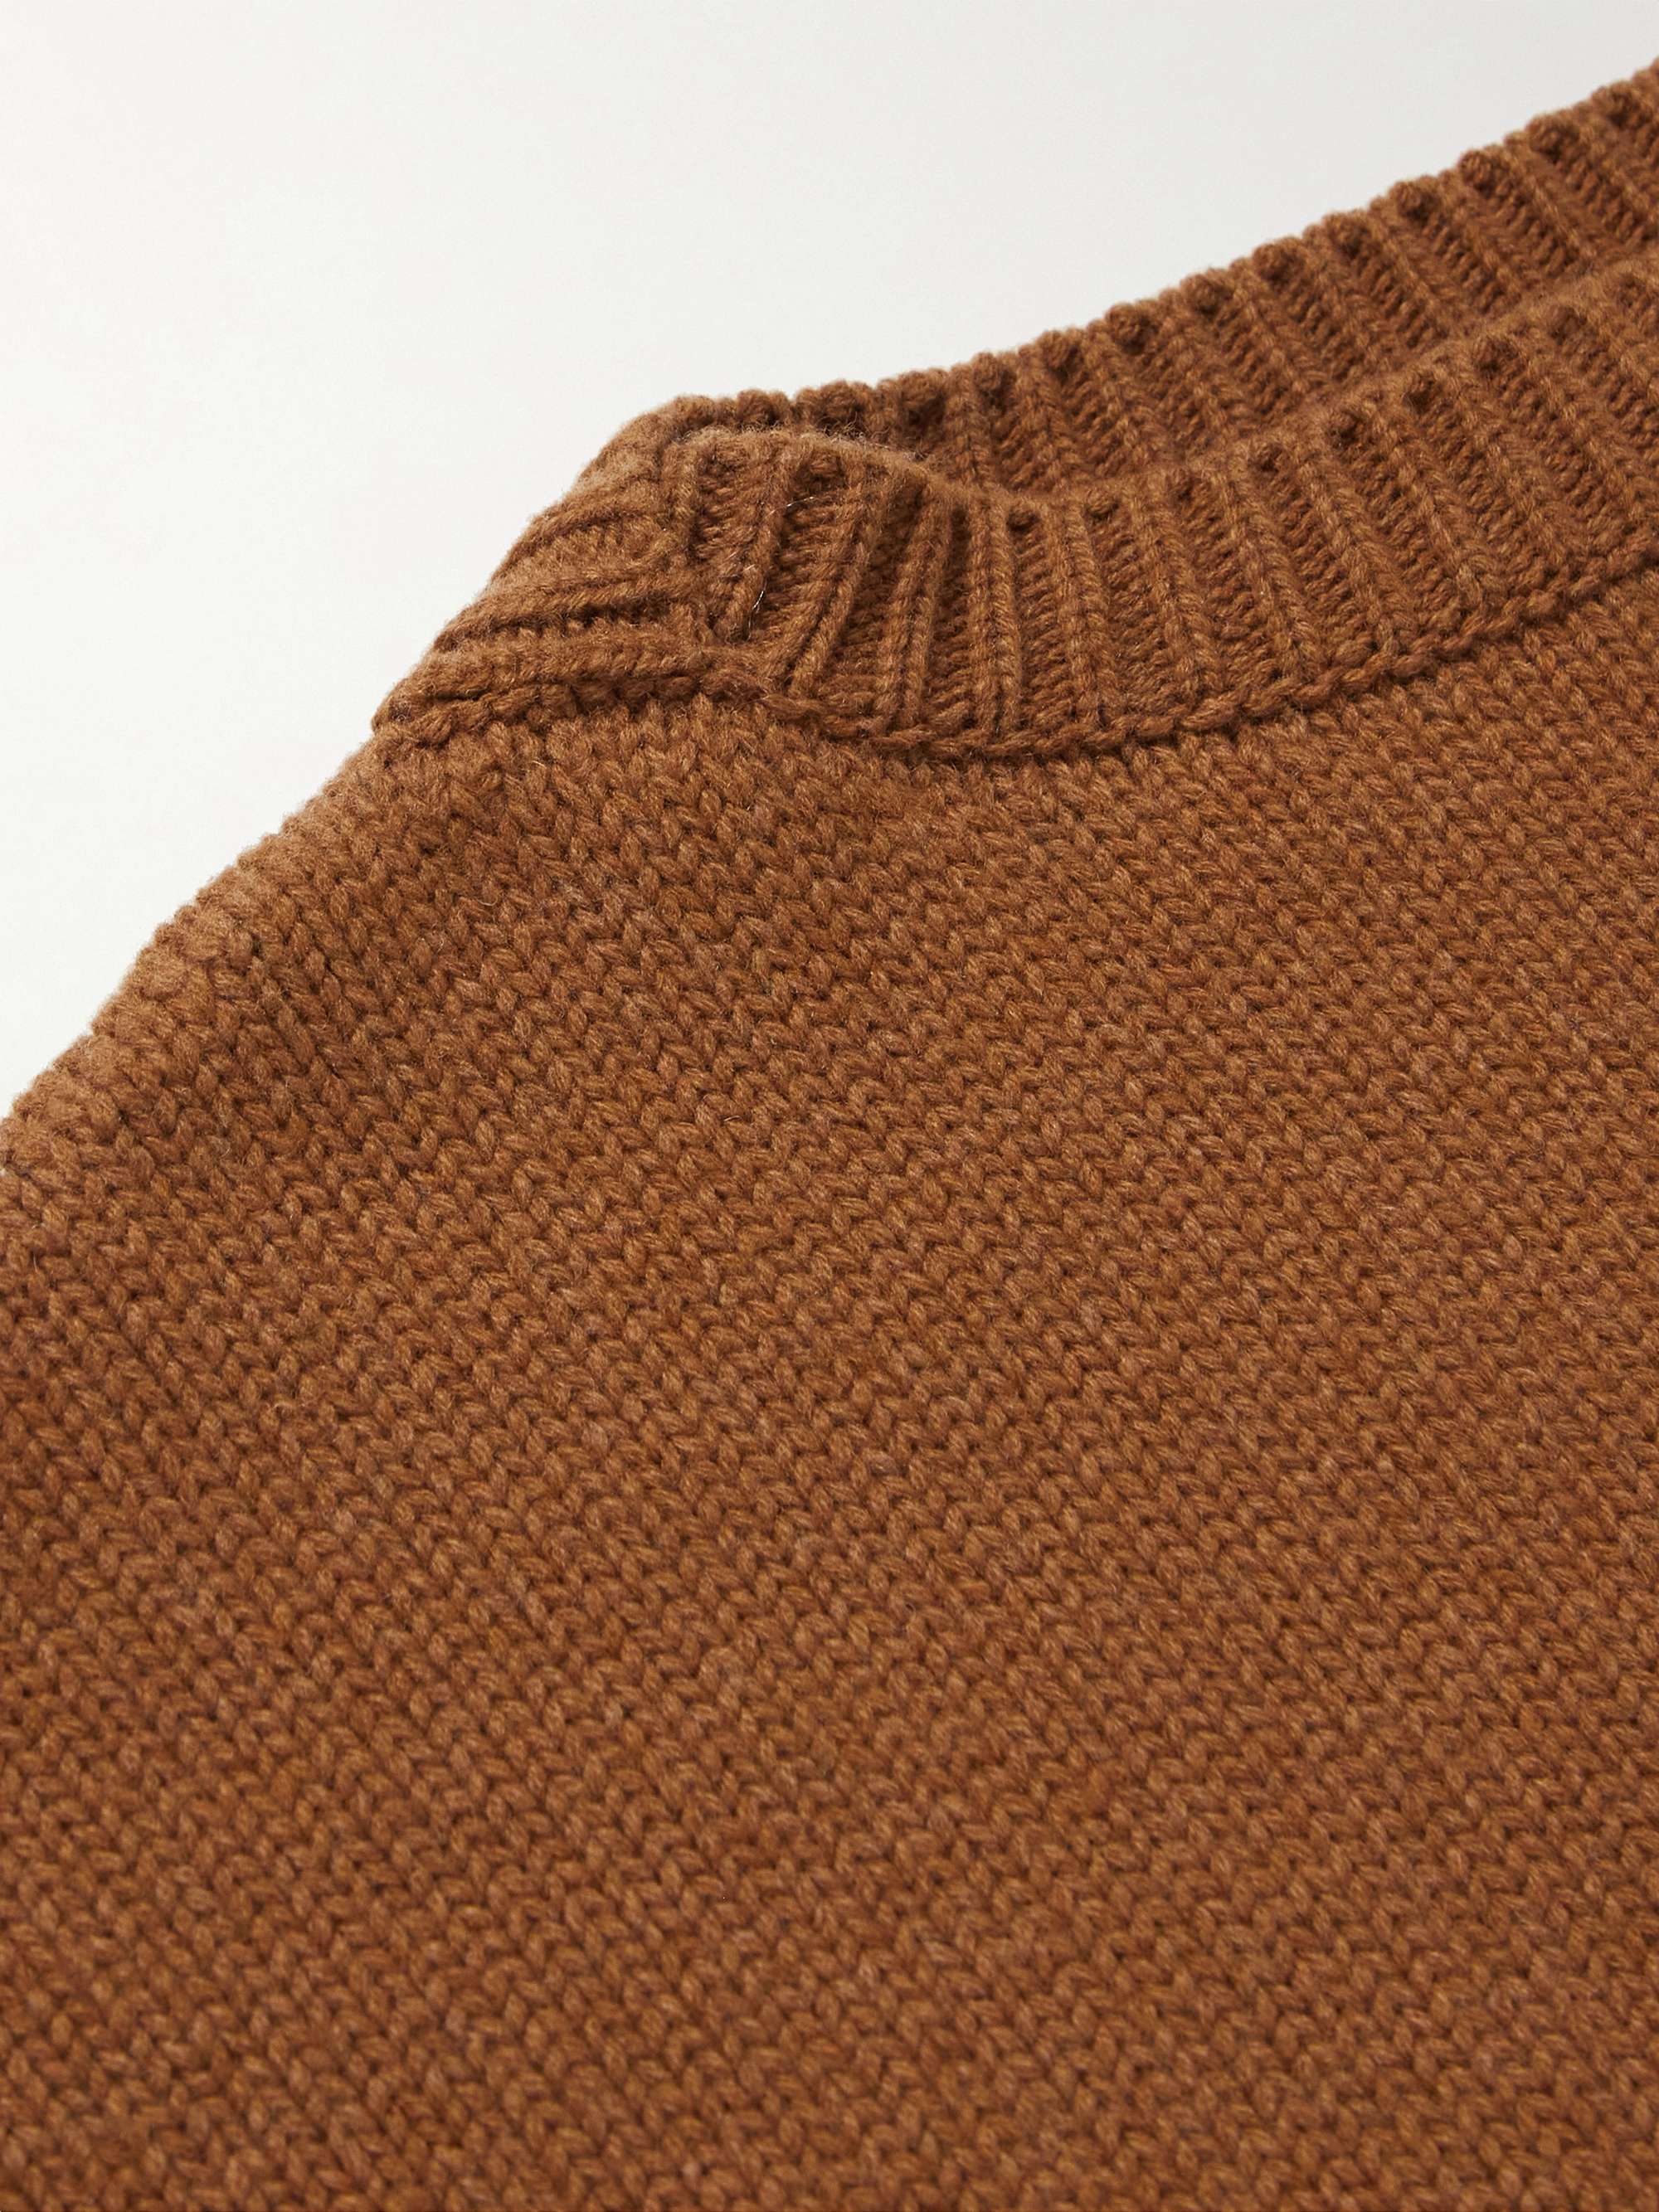 FEAR OF GOD Wool and Cashmere-Blend Sweater